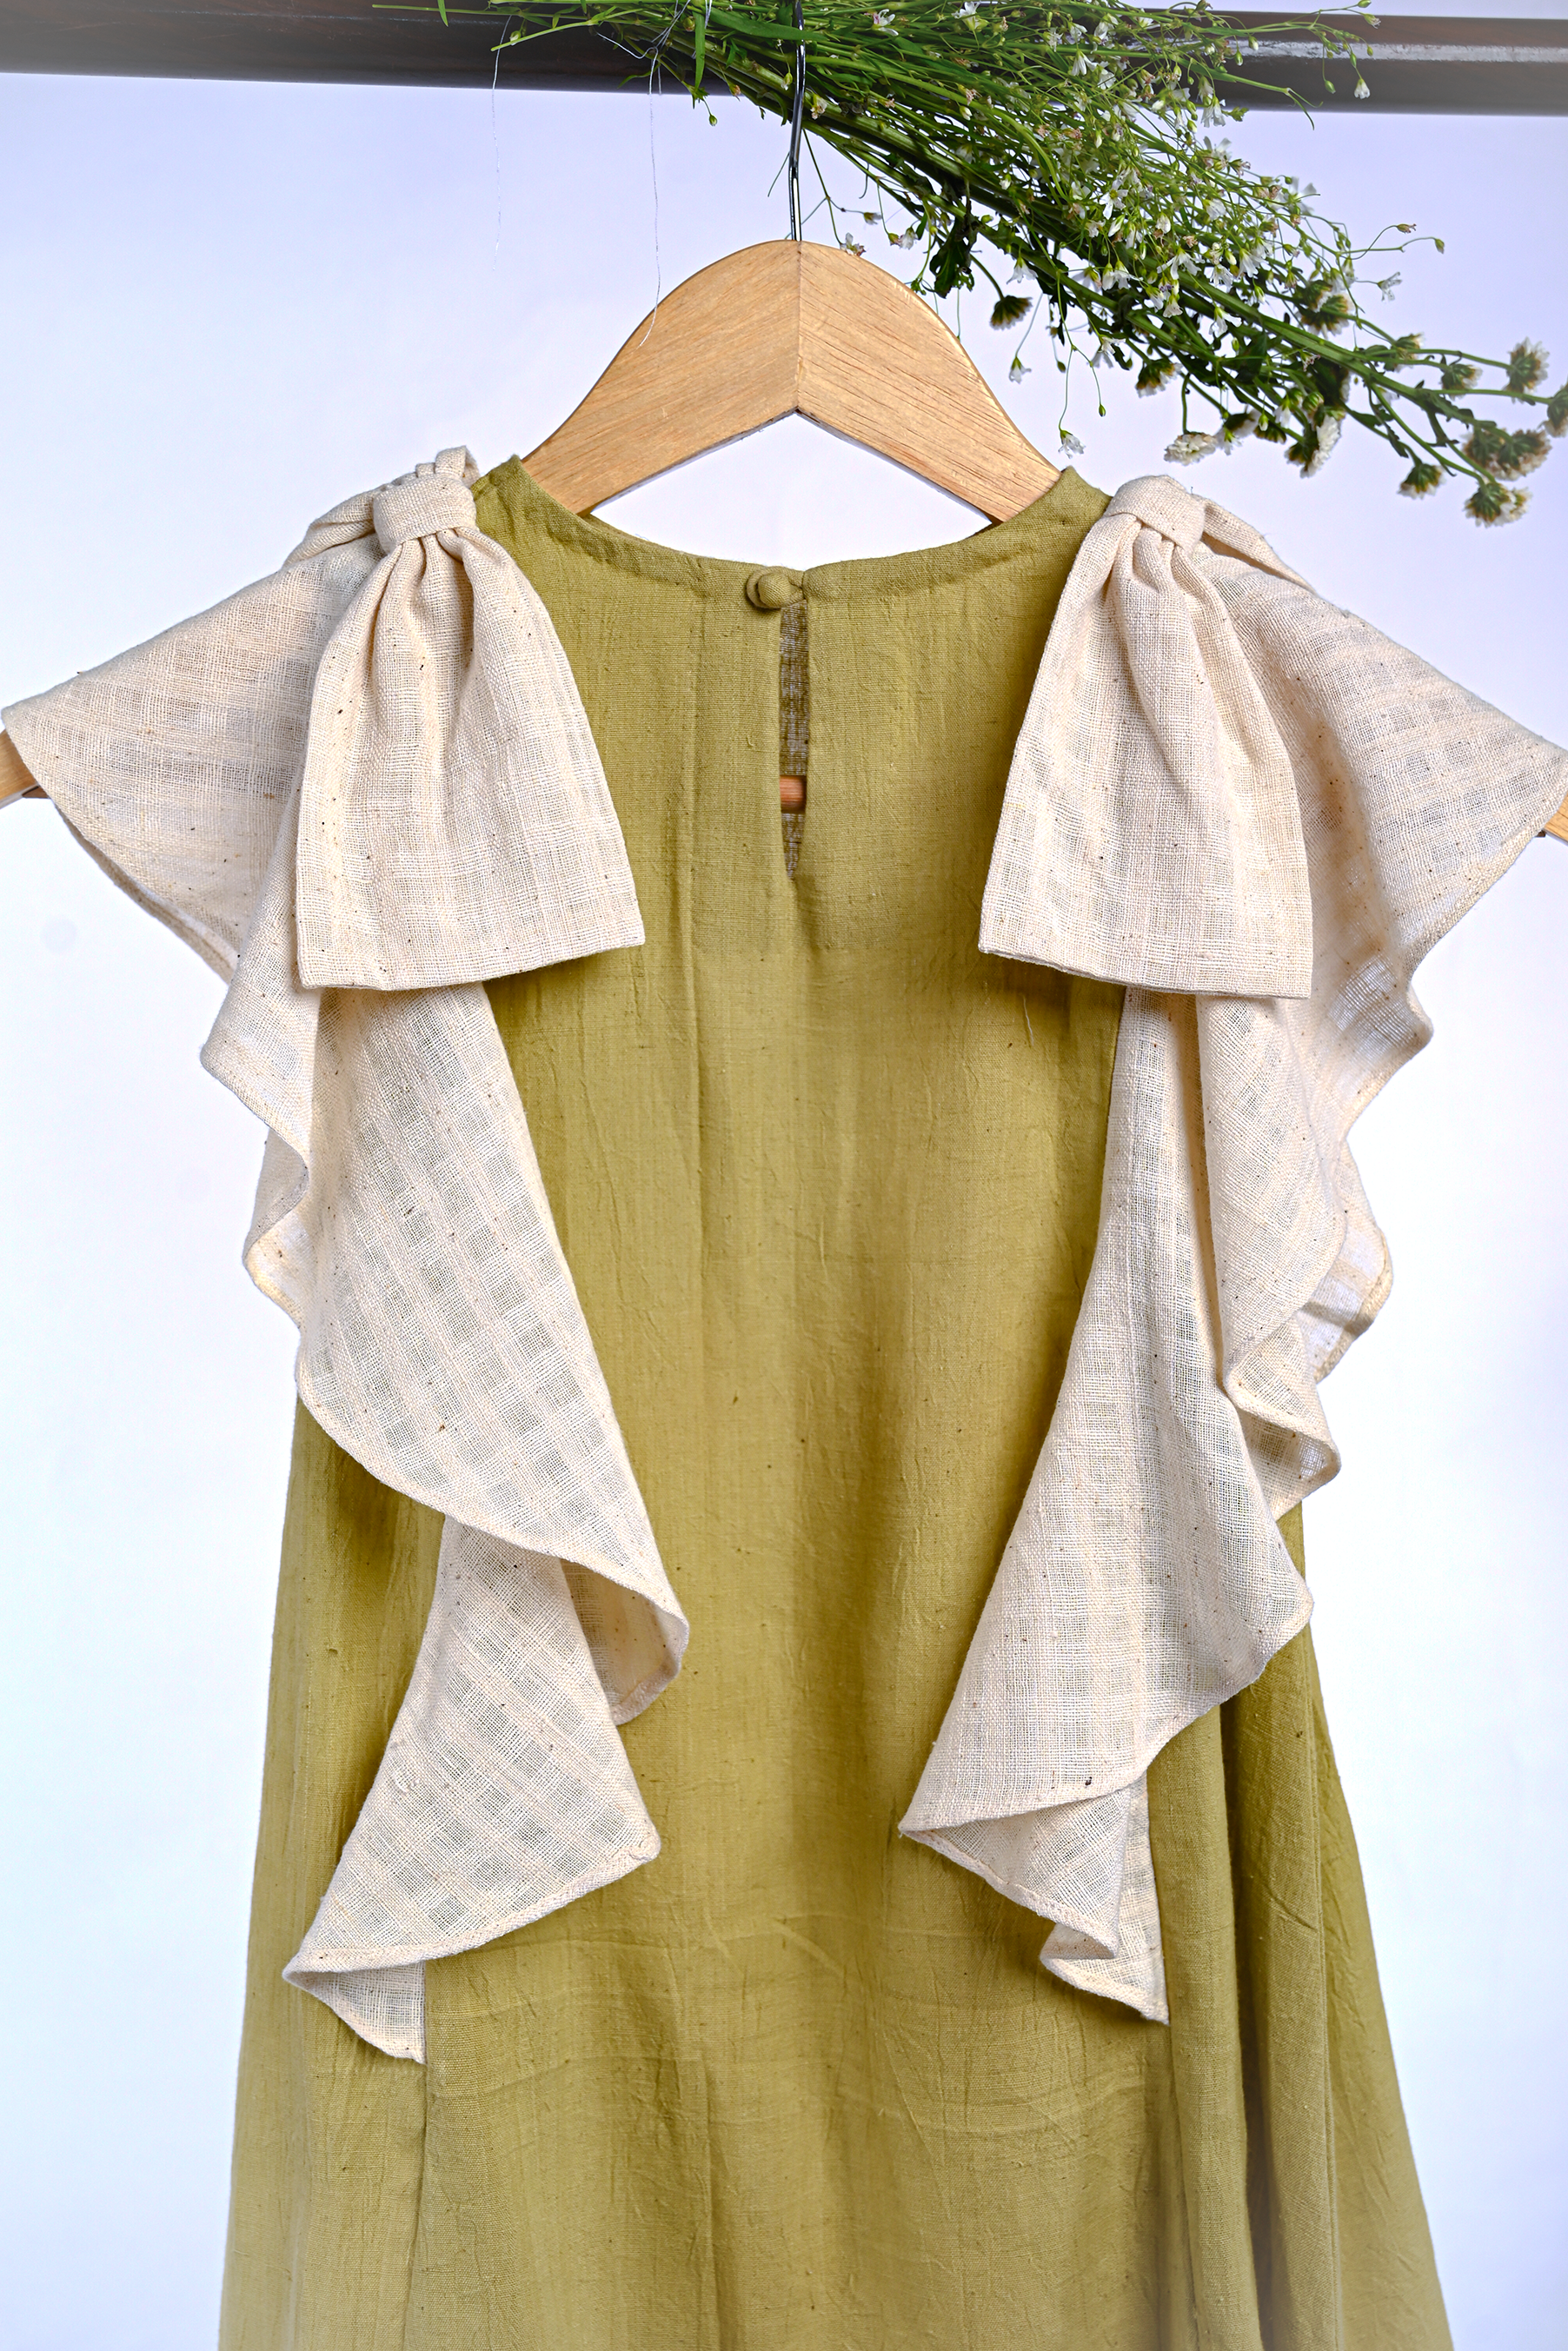 Handspun Handwoven Green Bow  Organic Cotton Dress for Girls | Sustainable Baby Organic Clothing | Dyed with Herbal Extracts | 100% Organic Cotton Kids Clothing  | ORA Organic India